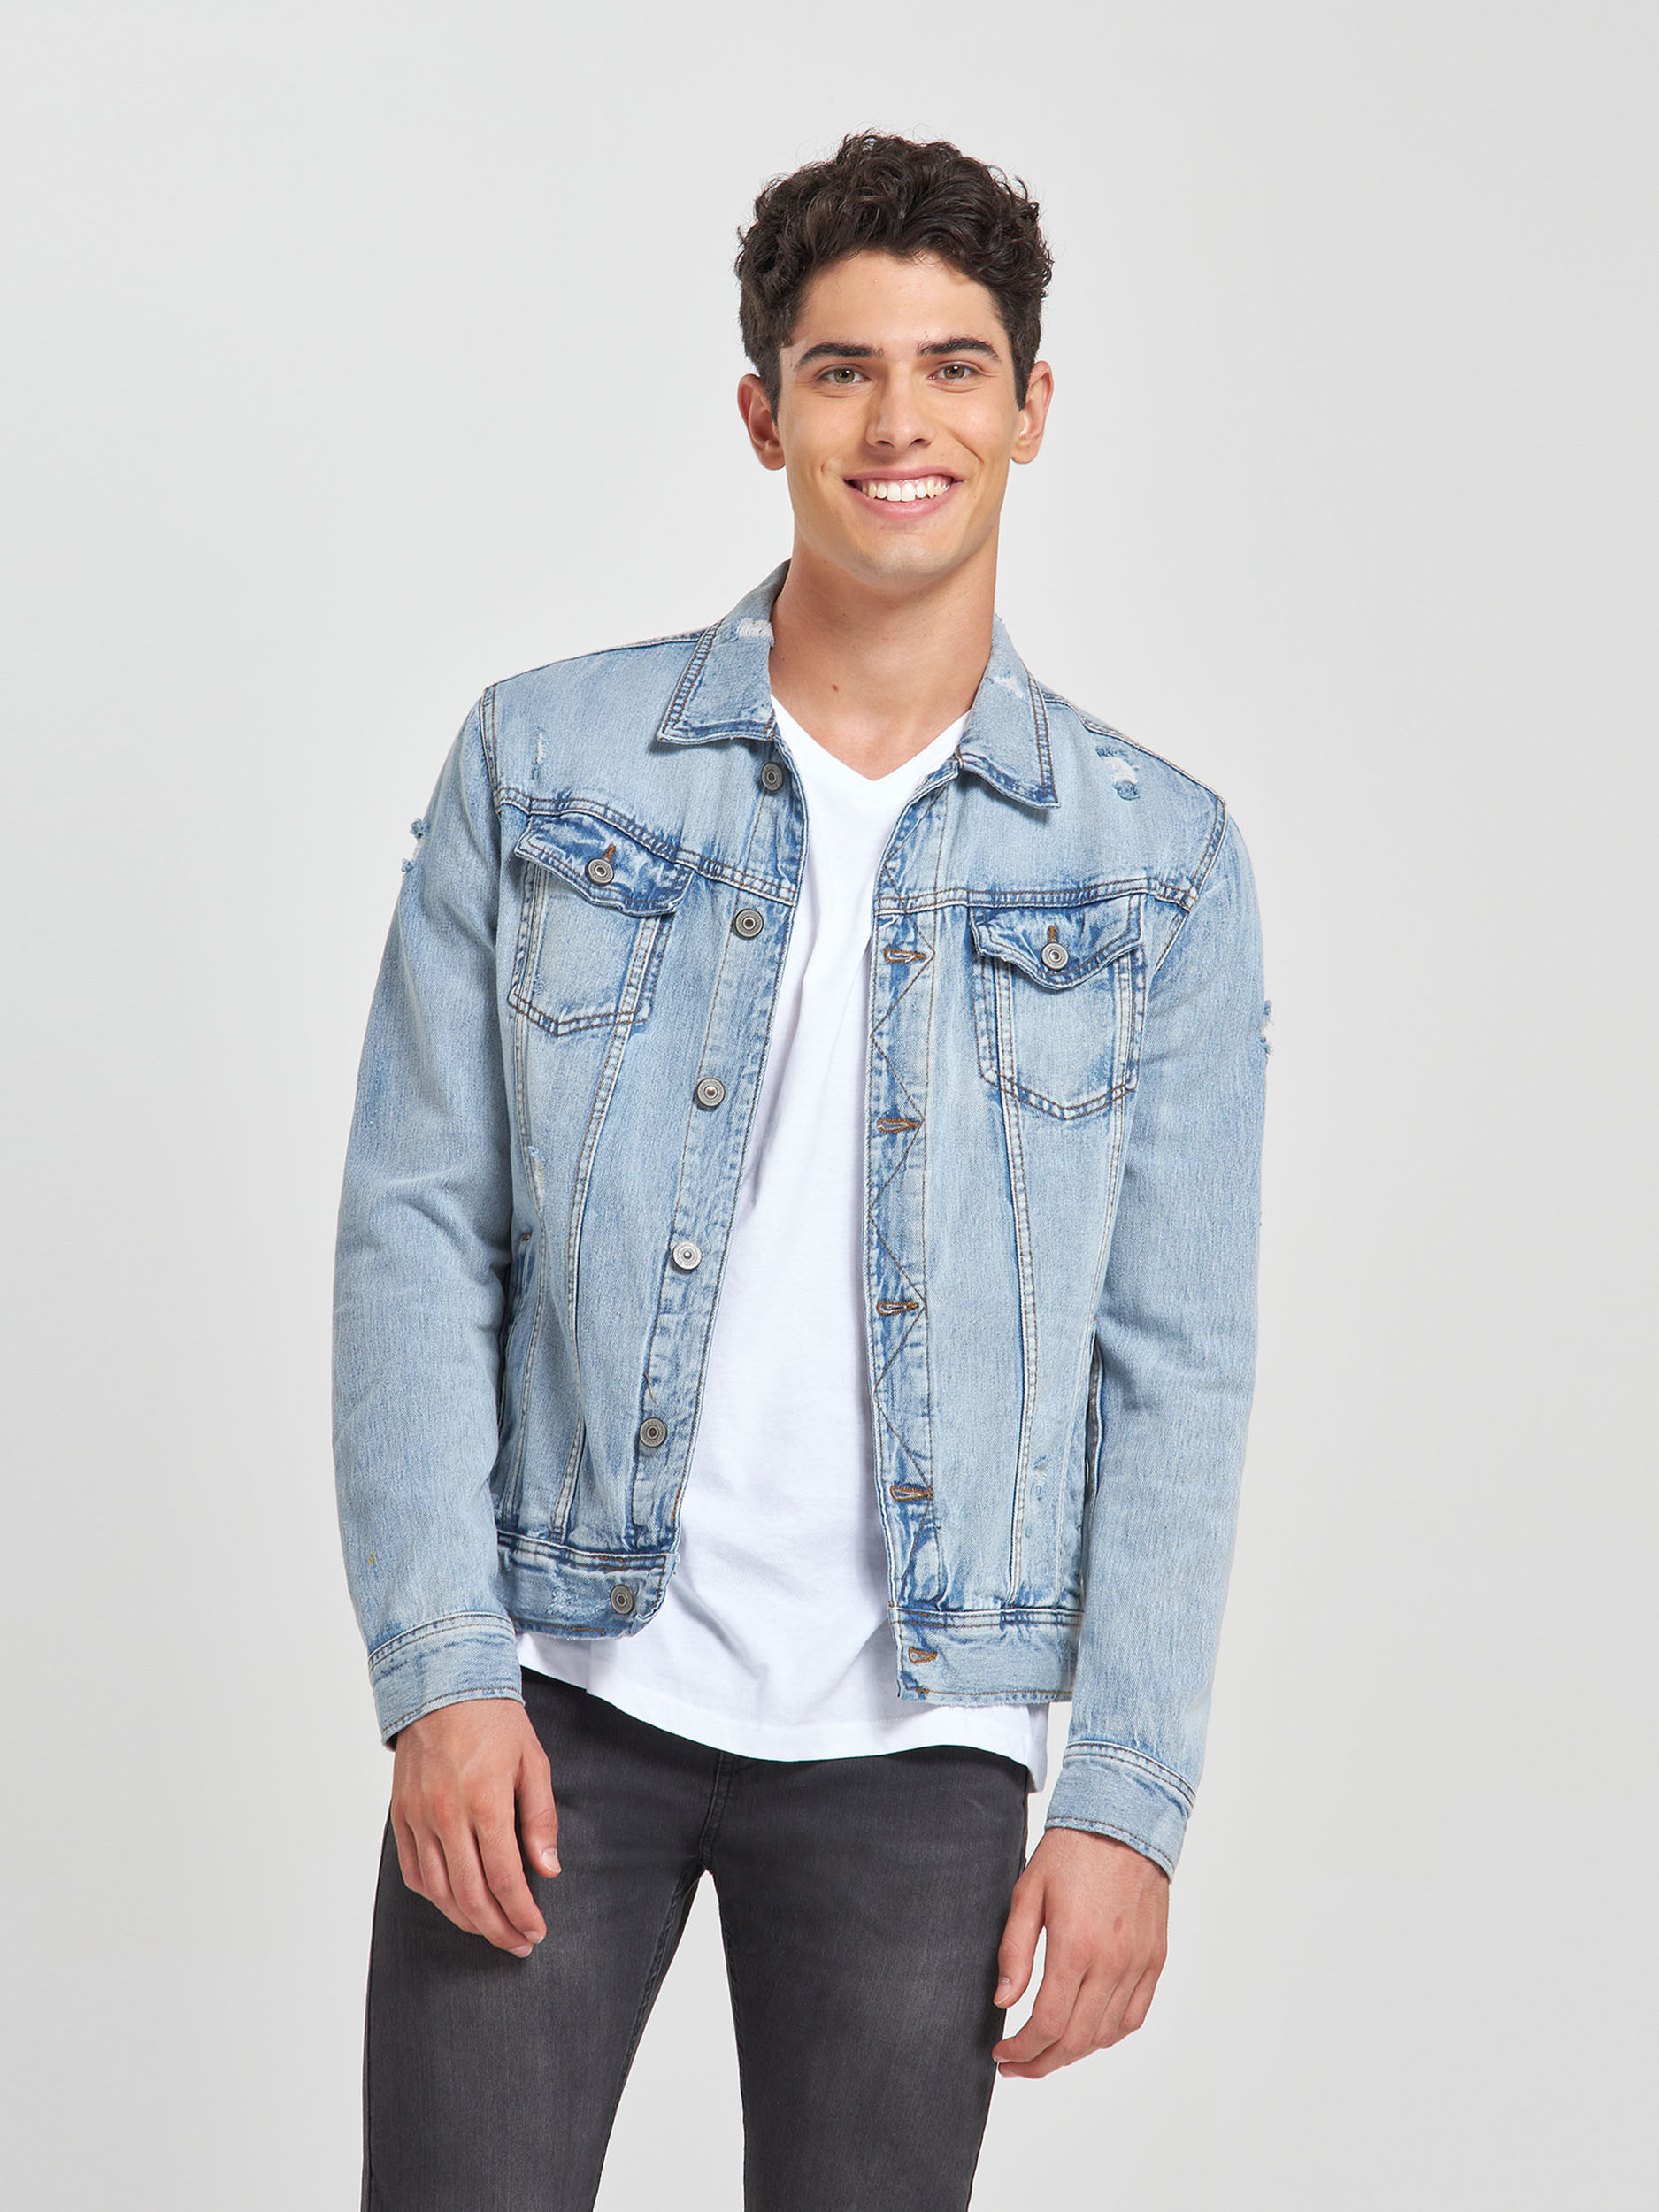 denim jacket and trousers